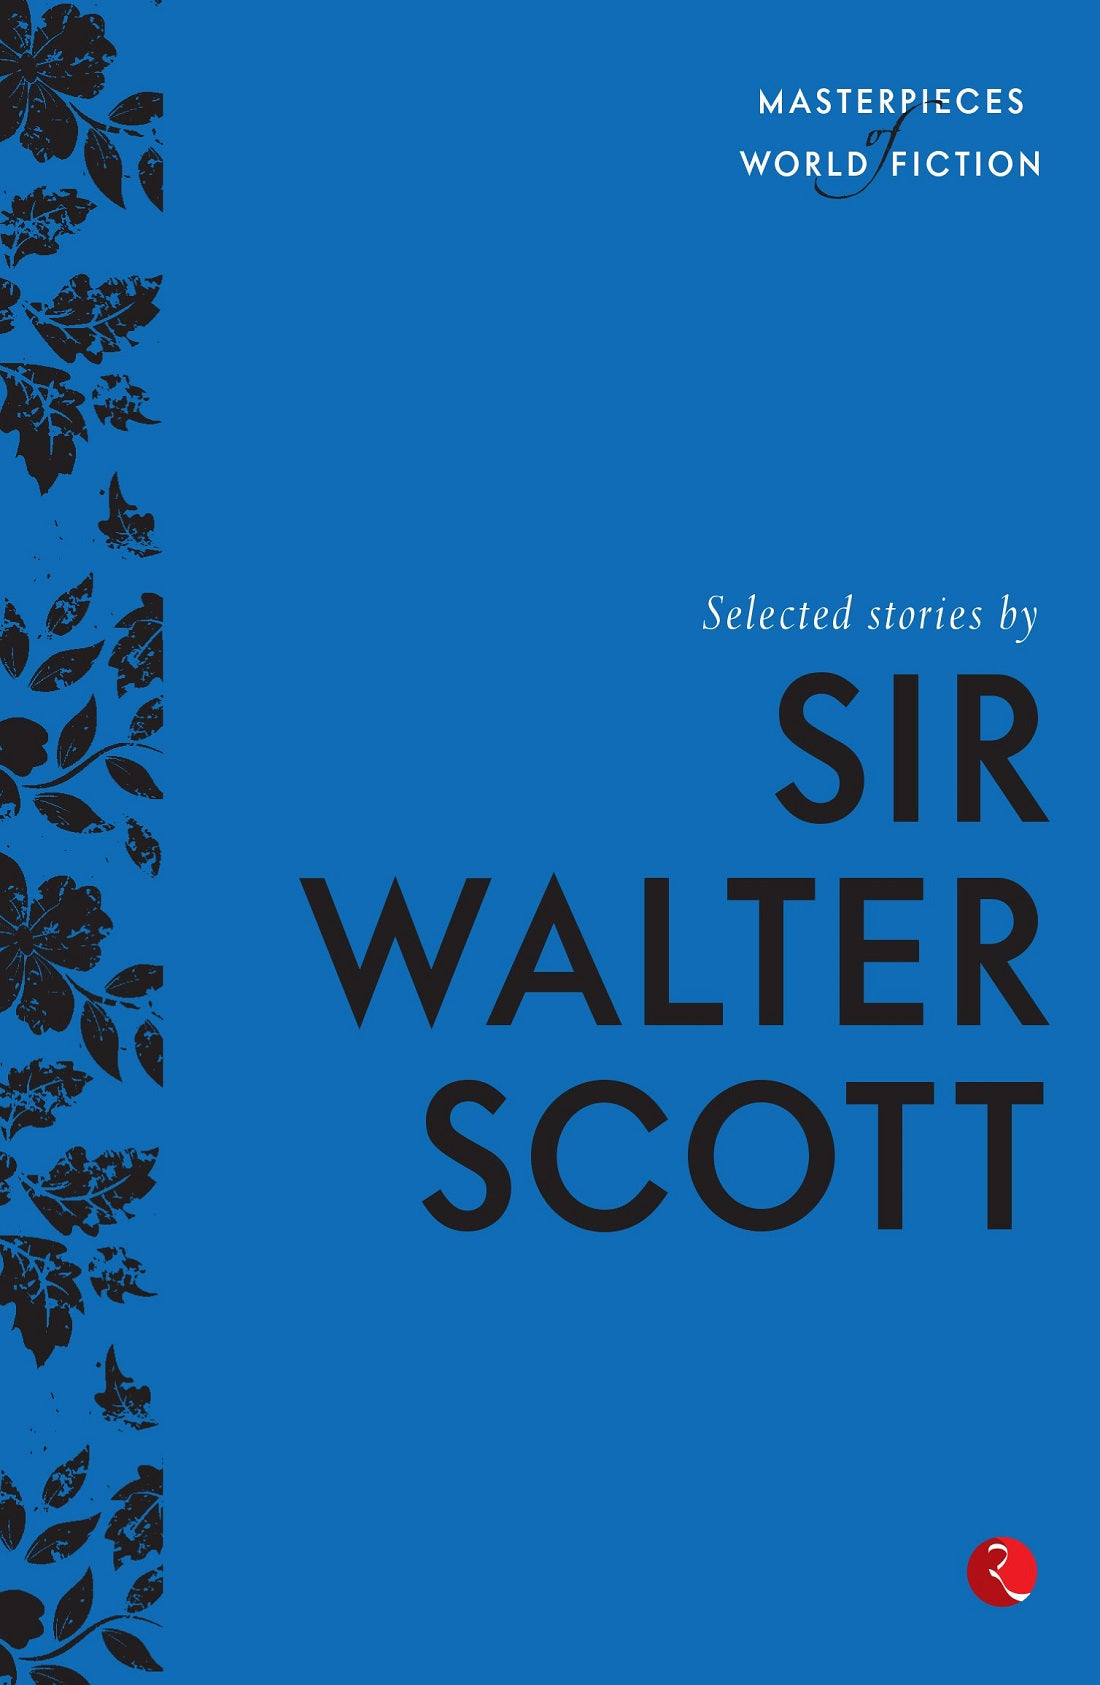 SELECTED STORIES BY SIR WALTER SCOTT